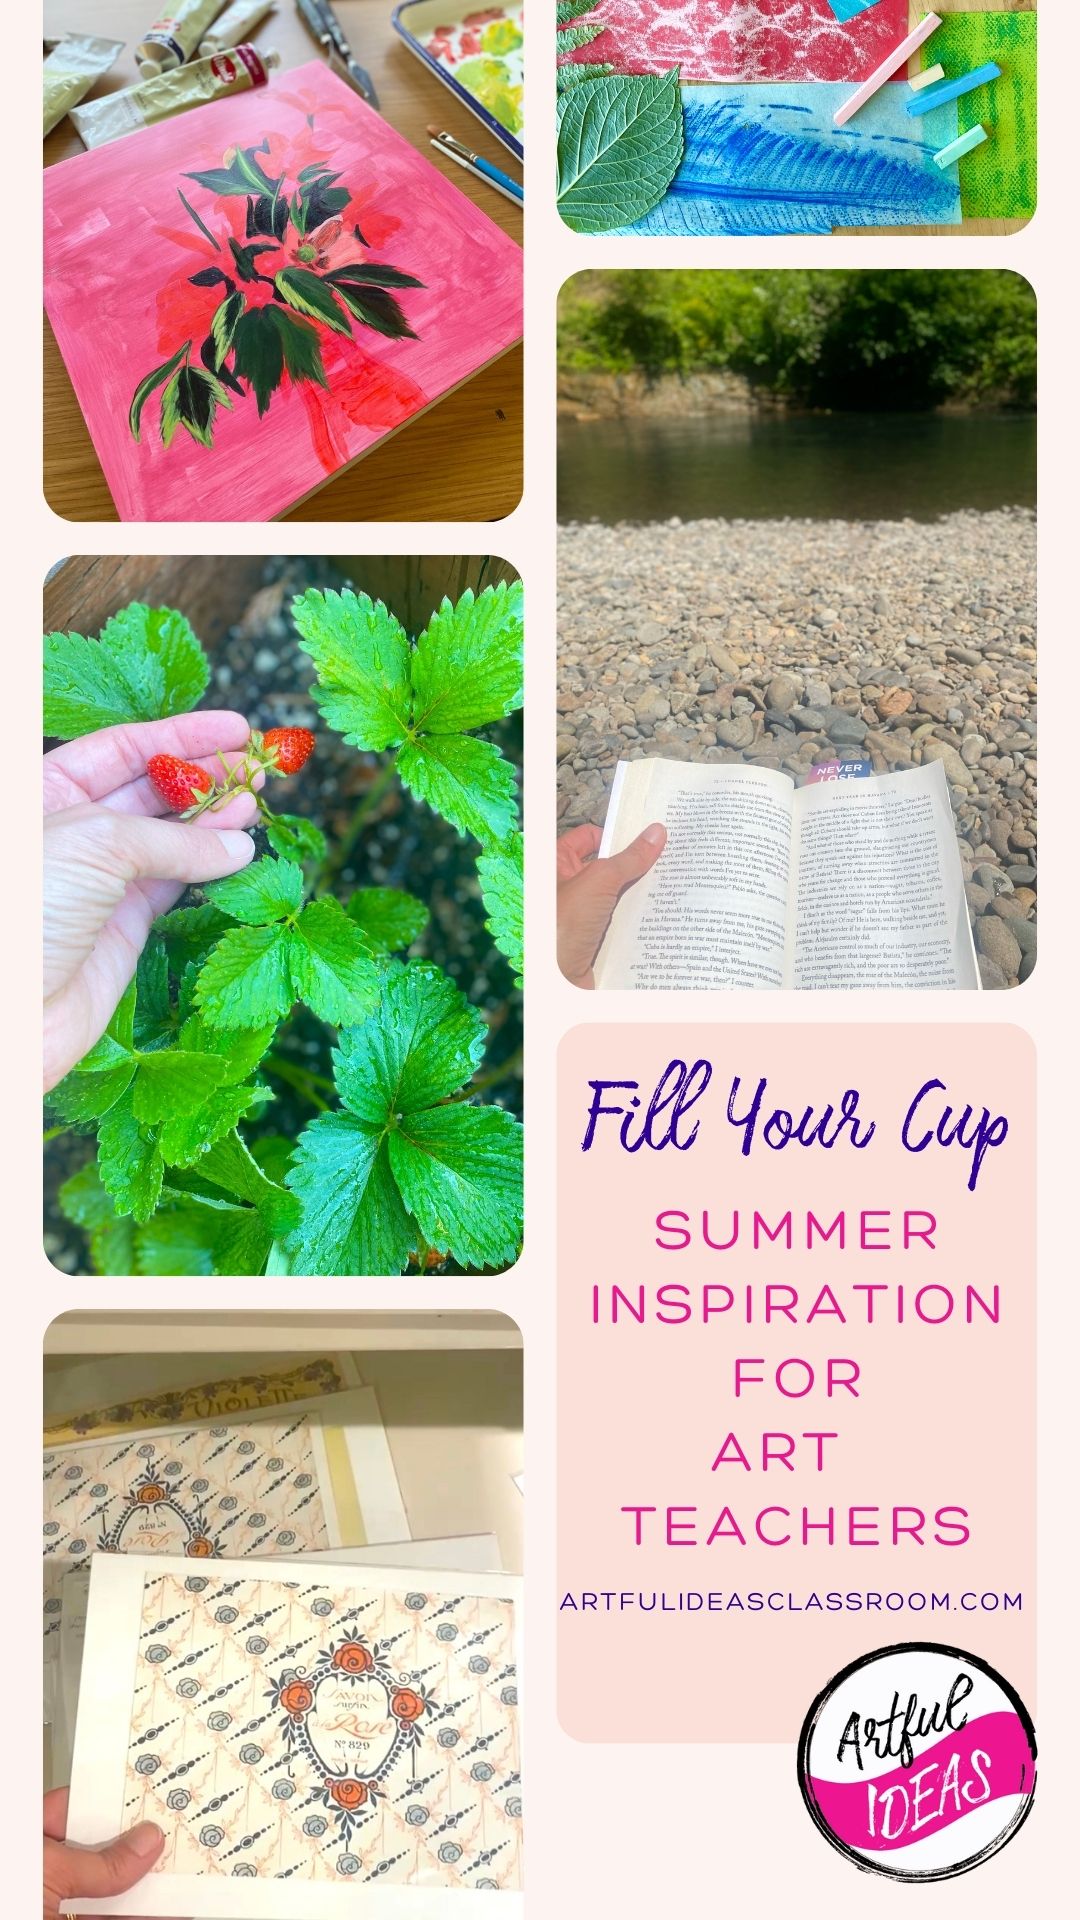 A collection of inspiring and restful images encouraging teachers to relax and recharge in the summer 